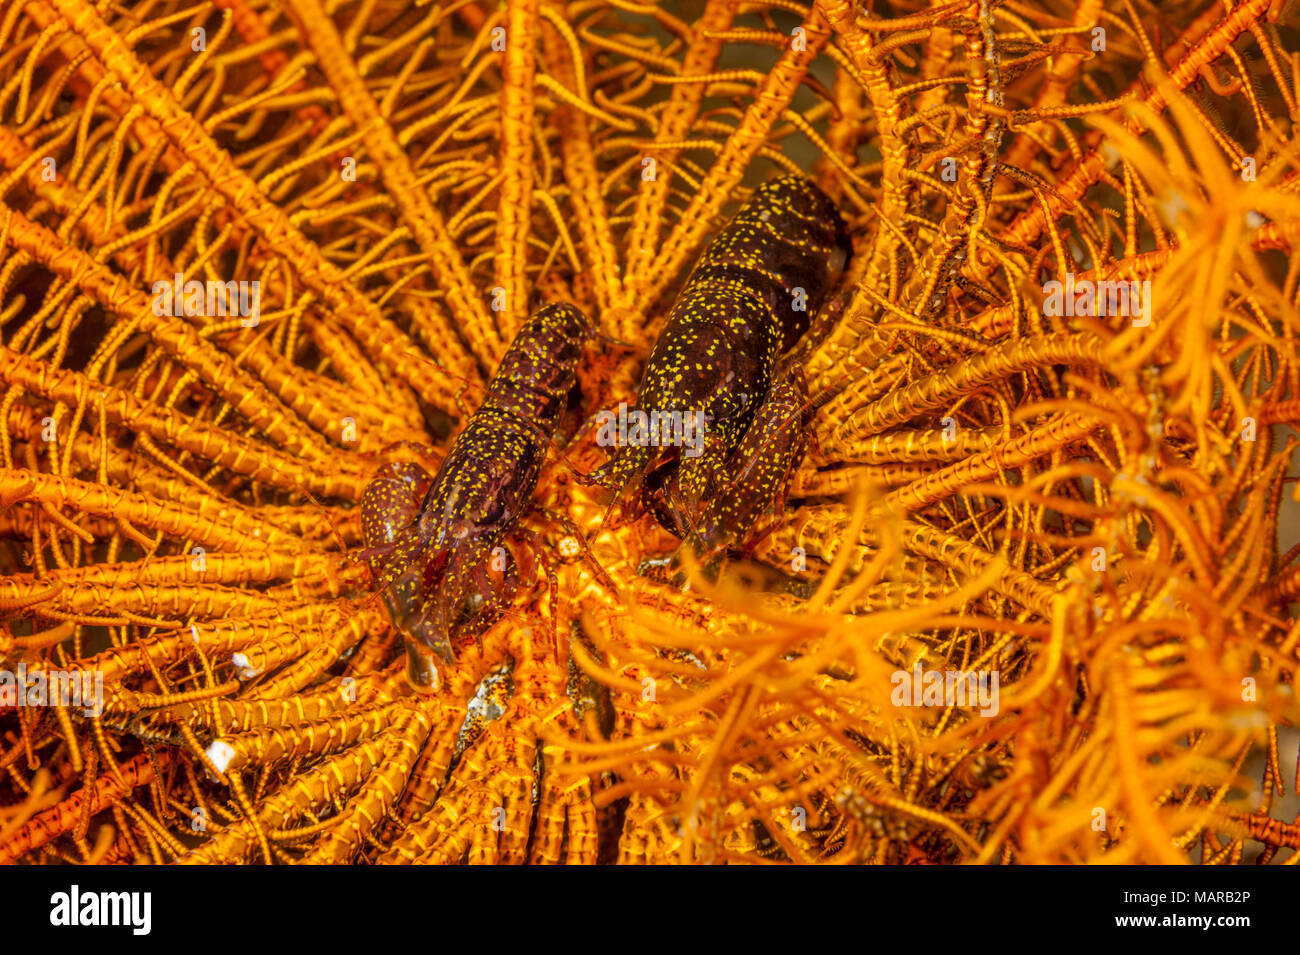 Snapping Shrimp, Pistol shrimp (Synalpheus stimpsoni) sitting in the middle of an crinoid. Stock Photo